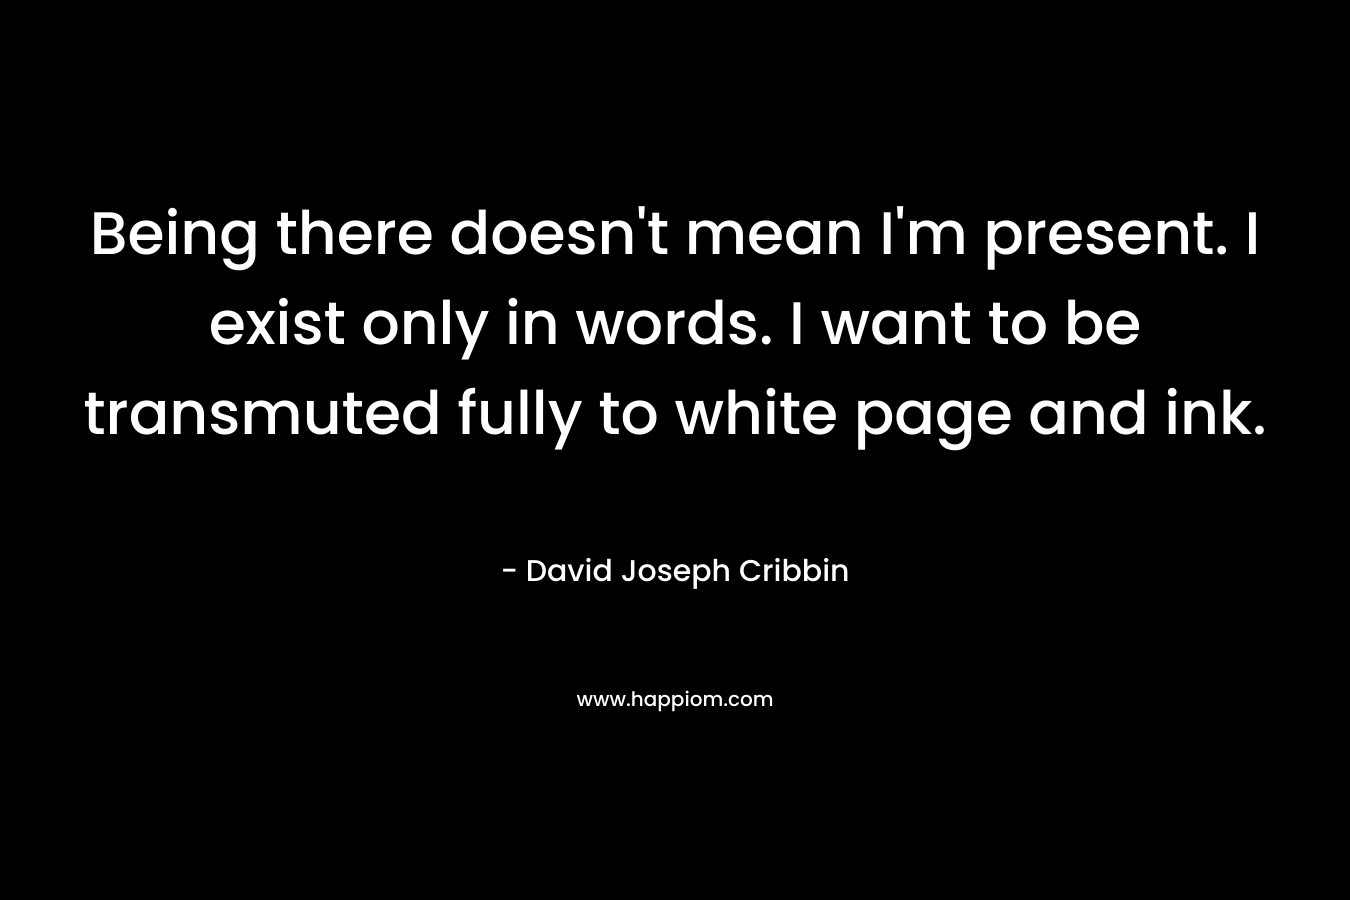 Being there doesn’t mean I’m present. I exist only in words. I want to be transmuted fully to white page and ink. – David Joseph Cribbin